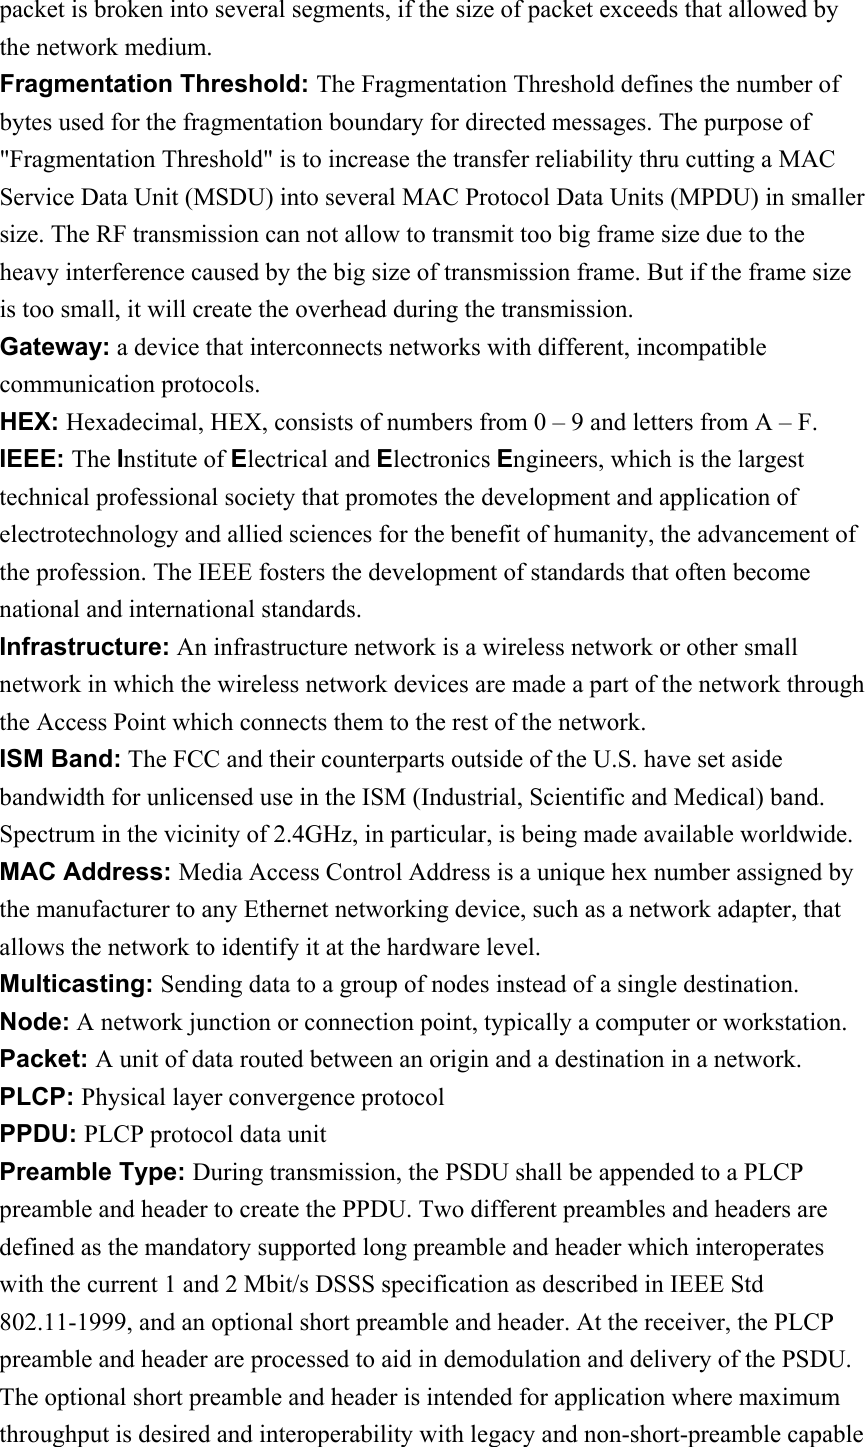 packet is broken into several segments, if the size of packet exceeds that allowed by the network medium. Fragmentation Threshold: The Fragmentation Threshold defines the number of bytes used for the fragmentation boundary for directed messages. The purpose of &quot;Fragmentation Threshold&quot; is to increase the transfer reliability thru cutting a MAC Service Data Unit (MSDU) into several MAC Protocol Data Units (MPDU) in smaller size. The RF transmission can not allow to transmit too big frame size due to the heavy interference caused by the big size of transmission frame. But if the frame size is too small, it will create the overhead during the transmission. Gateway: a device that interconnects networks with different, incompatible communication protocols. HEX: Hexadecimal, HEX, consists of numbers from 0 – 9 and letters from A – F. IEEE: The Institute of Electrical and Electronics Engineers, which is the largest technical professional society that promotes the development and application of electrotechnology and allied sciences for the benefit of humanity, the advancement of the profession. The IEEE fosters the development of standards that often become national and international standards. Infrastructure: An infrastructure network is a wireless network or other small network in which the wireless network devices are made a part of the network through the Access Point which connects them to the rest of the network. ISM Band: The FCC and their counterparts outside of the U.S. have set aside bandwidth for unlicensed use in the ISM (Industrial, Scientific and Medical) band.   Spectrum in the vicinity of 2.4GHz, in particular, is being made available worldwide. MAC Address: Media Access Control Address is a unique hex number assigned by the manufacturer to any Ethernet networking device, such as a network adapter, that allows the network to identify it at the hardware level. Multicasting: Sending data to a group of nodes instead of a single destination. Node: A network junction or connection point, typically a computer or workstation. Packet: A unit of data routed between an origin and a destination in a network. PLCP: Physical layer convergence protocol PPDU: PLCP protocol data unit Preamble Type: During transmission, the PSDU shall be appended to a PLCP preamble and header to create the PPDU. Two different preambles and headers are defined as the mandatory supported long preamble and header which interoperates with the current 1 and 2 Mbit/s DSSS specification as described in IEEE Std 802.11-1999, and an optional short preamble and header. At the receiver, the PLCP preamble and header are processed to aid in demodulation and delivery of the PSDU.   The optional short preamble and header is intended for application where maximum throughput is desired and interoperability with legacy and non-short-preamble capable 